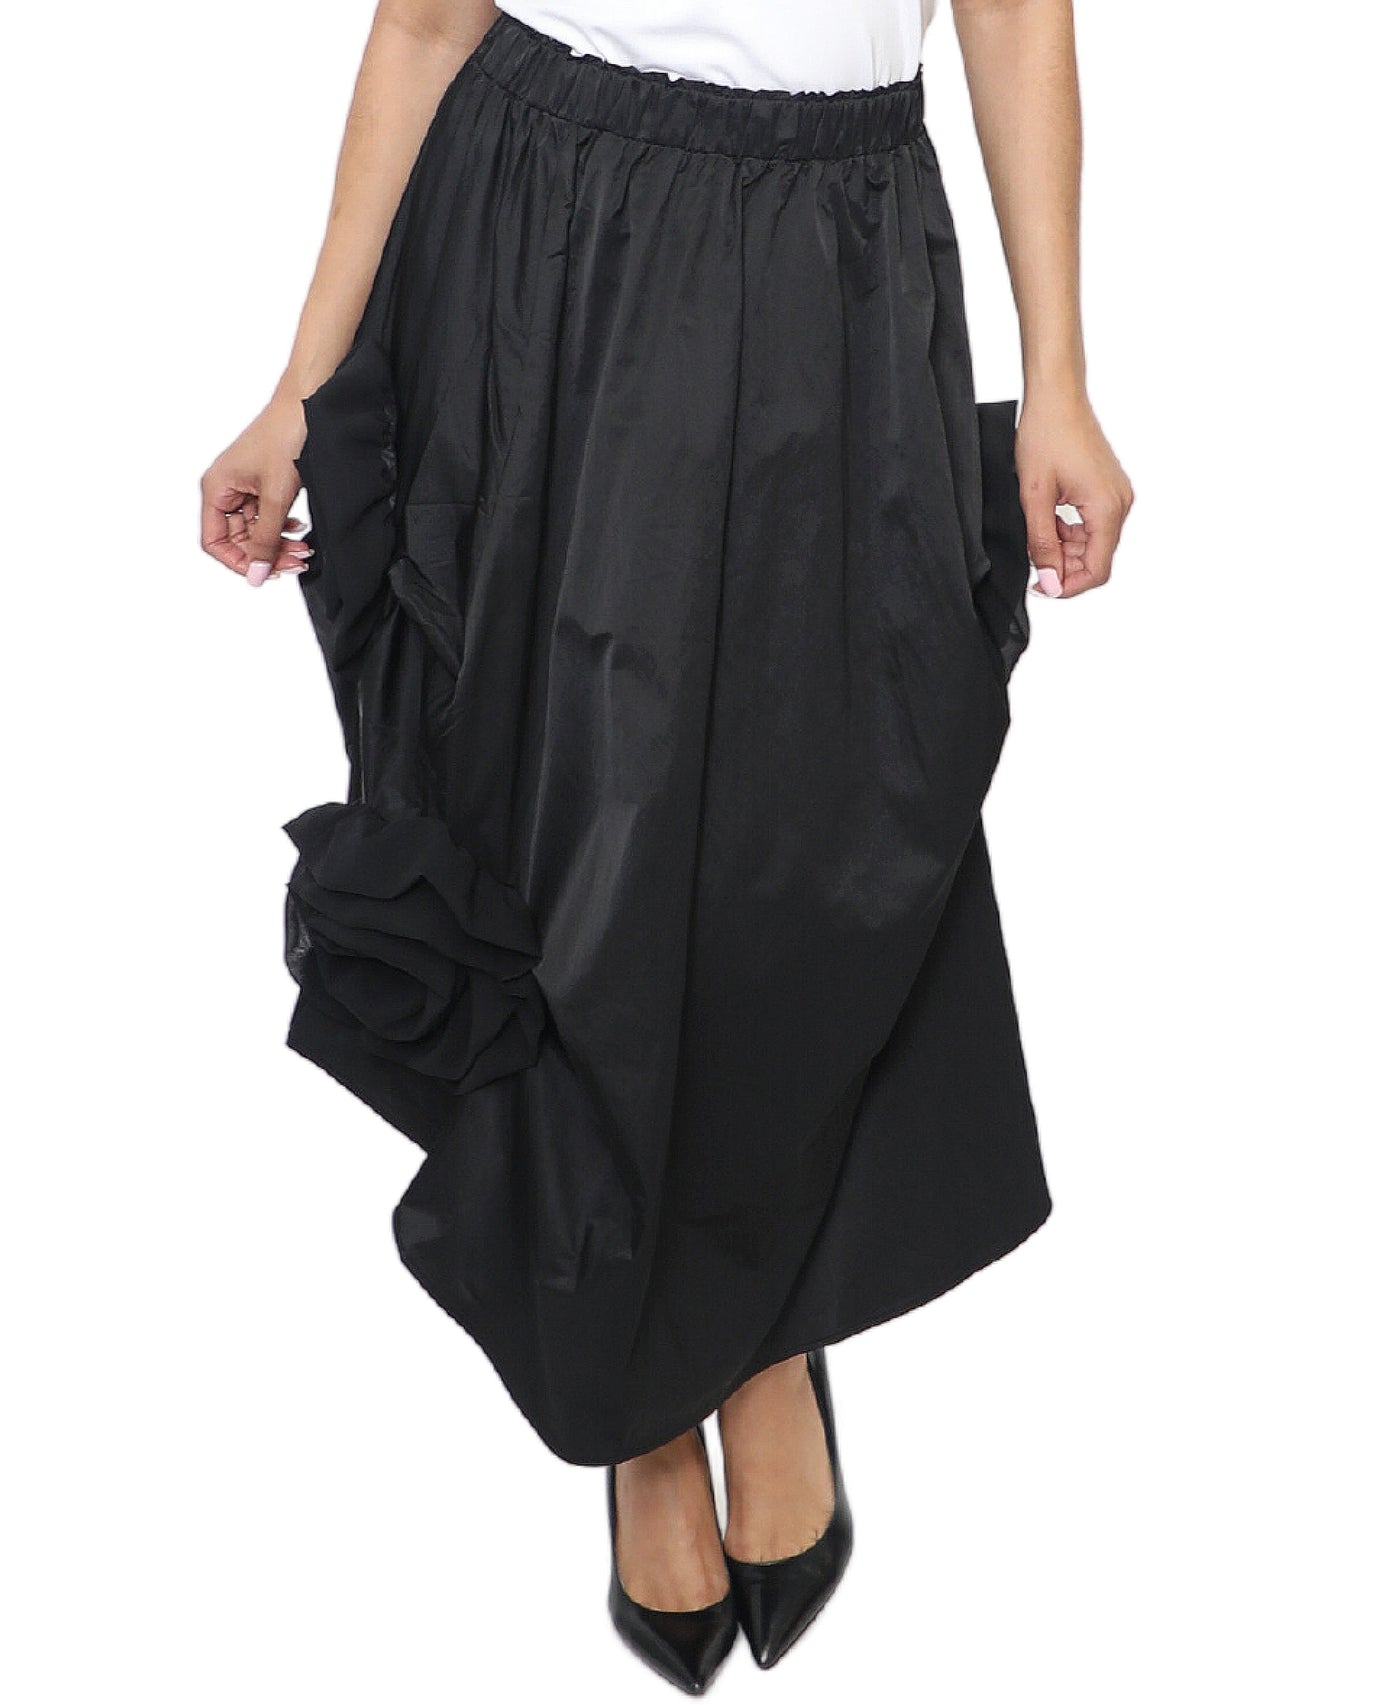 Ruched Floral Midi Skirt image 1